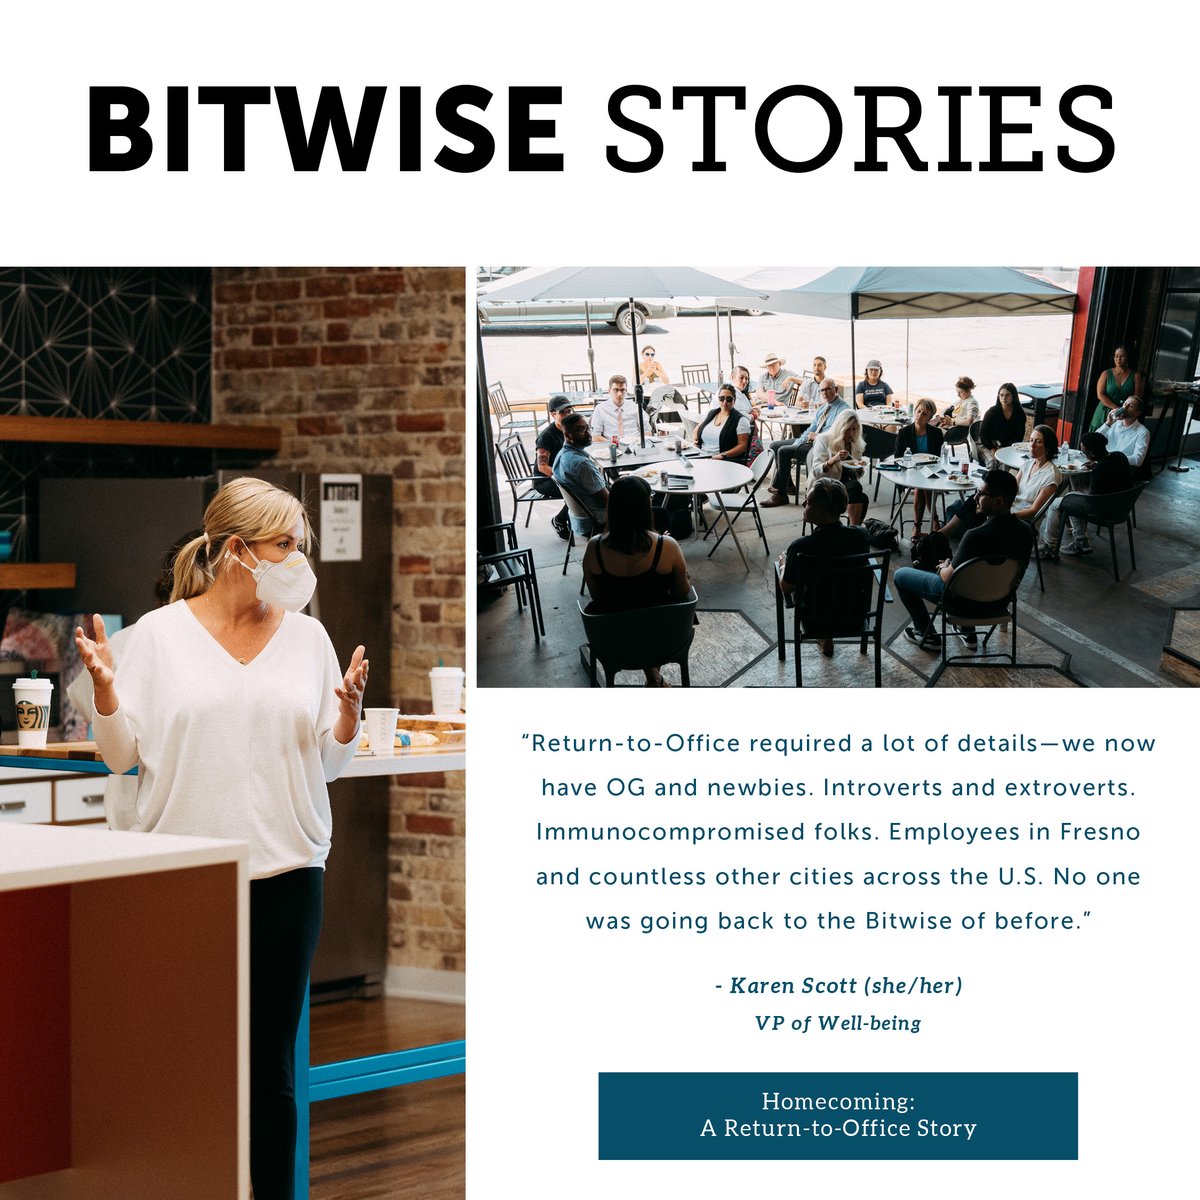 Scheduling systems, revamped air filtration, well-being groups—all of these projects and more were completed in preparation for our team to return to in-person work. Check out the latest Bitwise Story to learn about how we accomplished RTO! bit.ly/BWStoryRTO #BitwiseStories